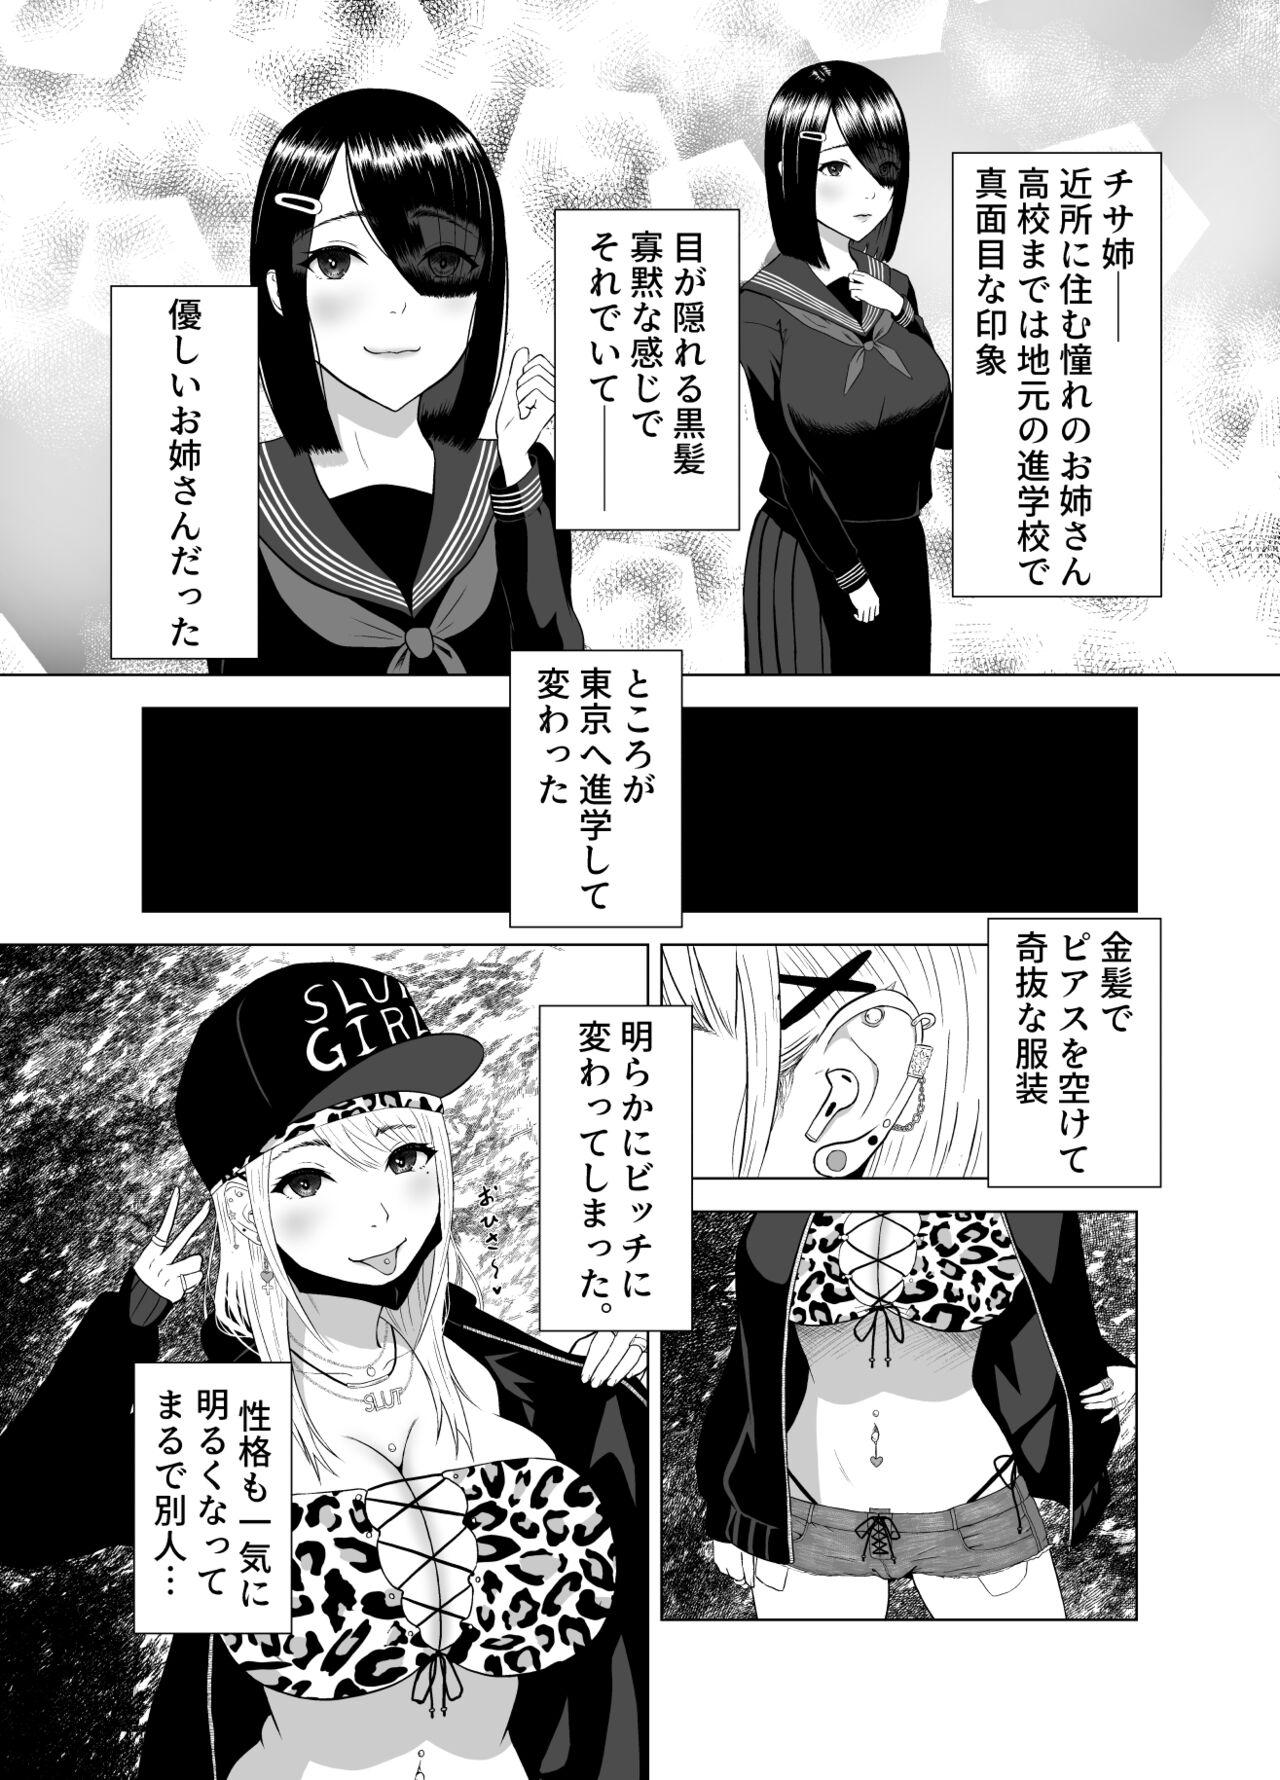 Glamour D★T搾精 - Original Doctor - Page 4